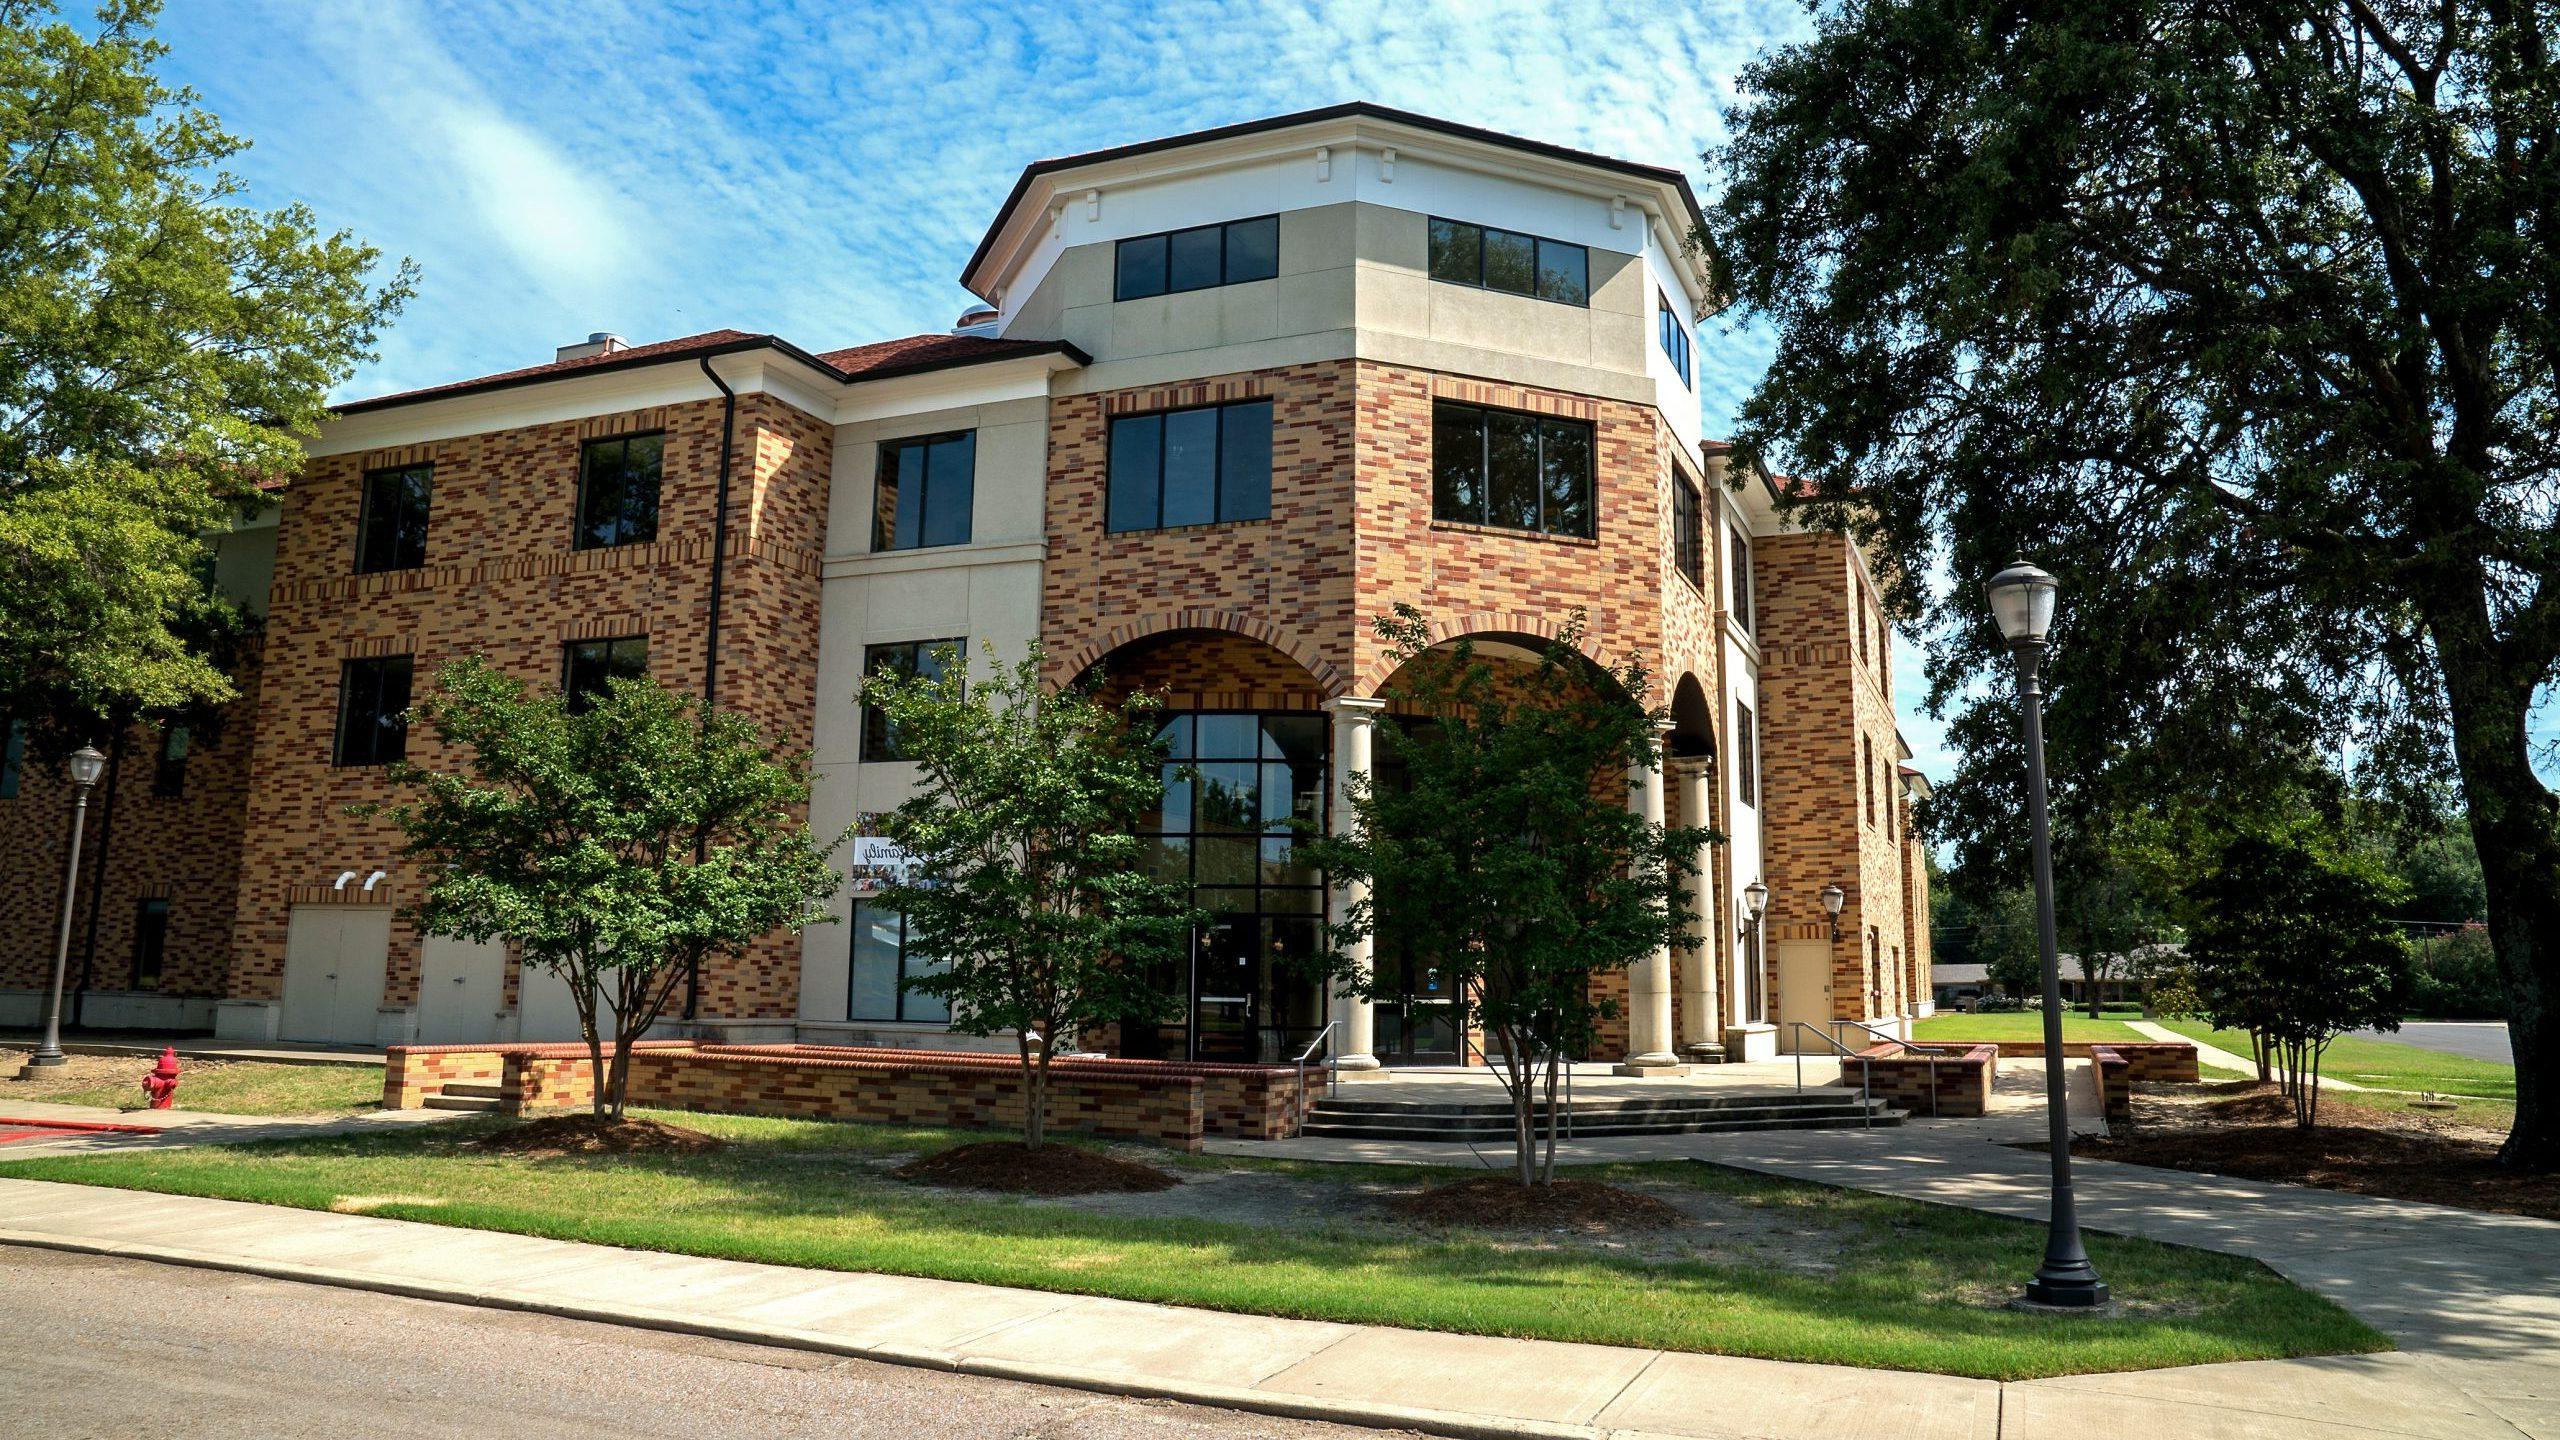 Exterior view of Foundation residence hall.